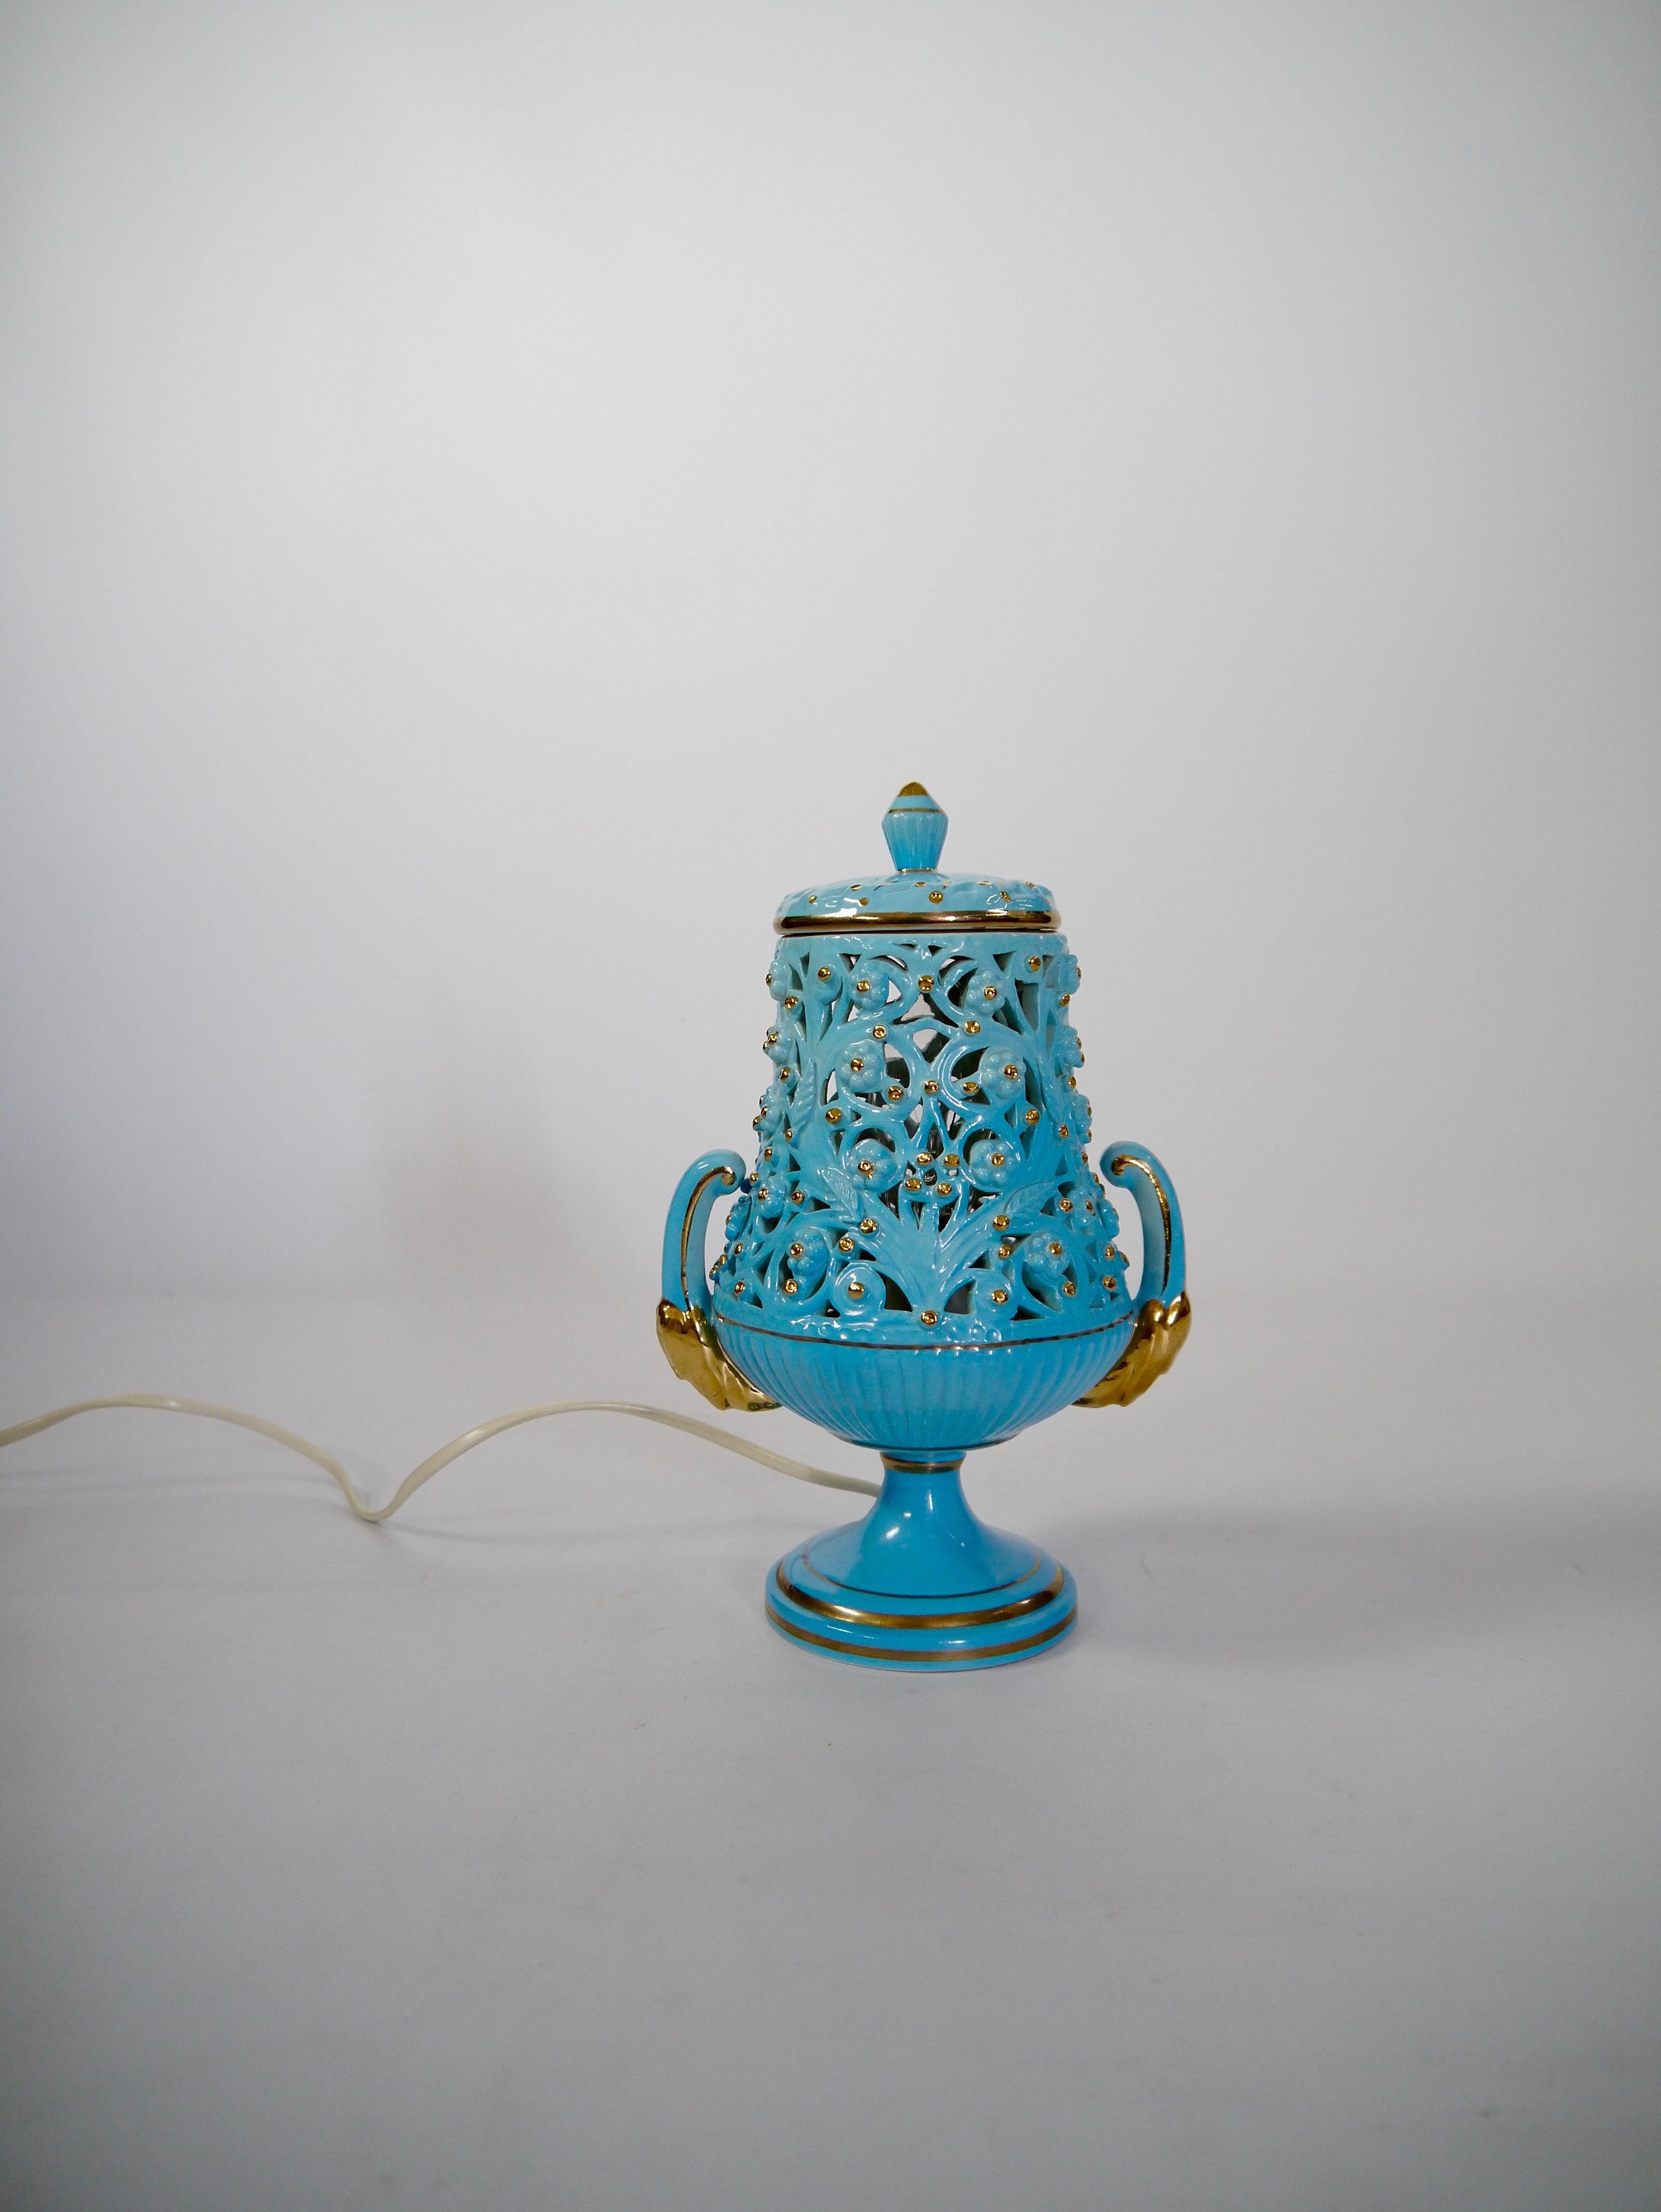 Kitsch Italian ceramic lamp, mimicking an urn with handles and lid, fabricated in the 1960s. Popping brilliant azure blue with gold inlays, pierced organic pattern that lets light shine through creating an eye catching shadow/light display. Marked